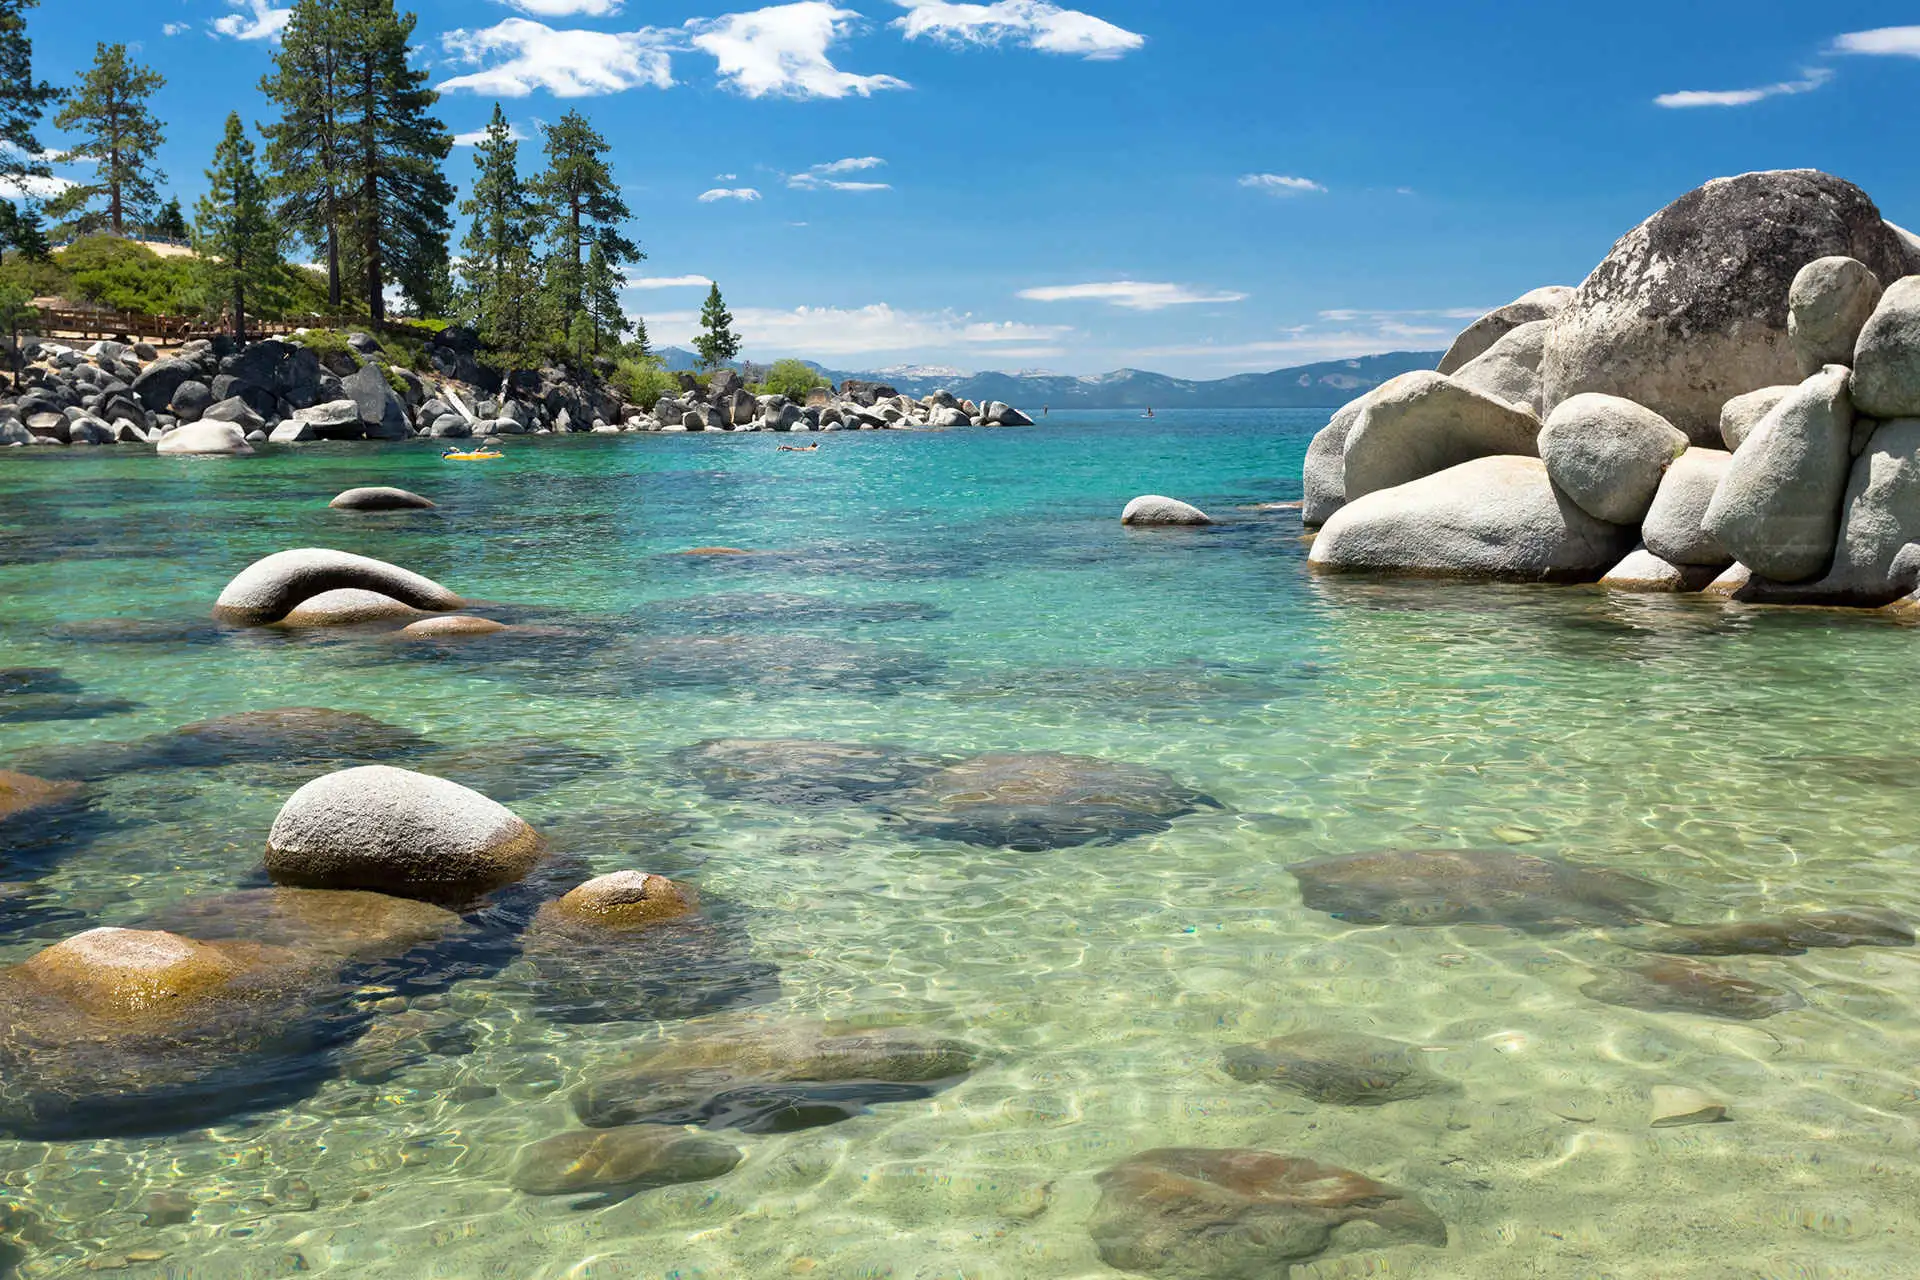 view of lake tahoe; Courtesy of topseller/Shutterstock.com